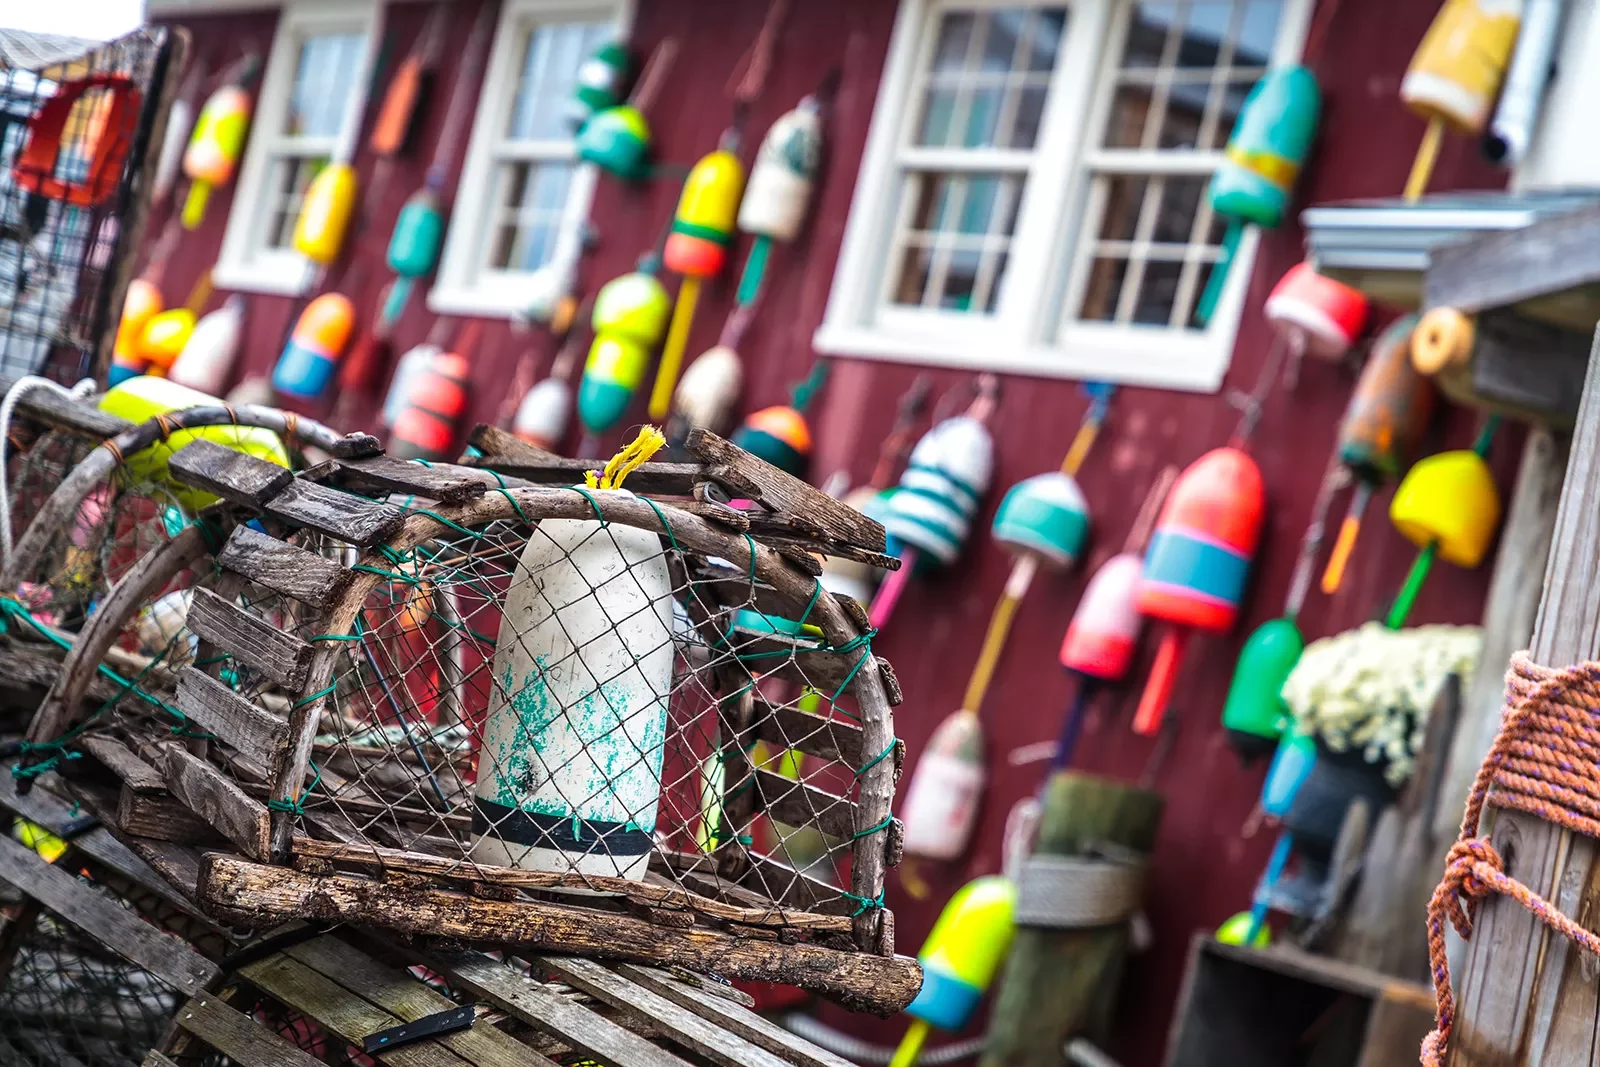 Shot of lobster trap in front of red fishing shack.